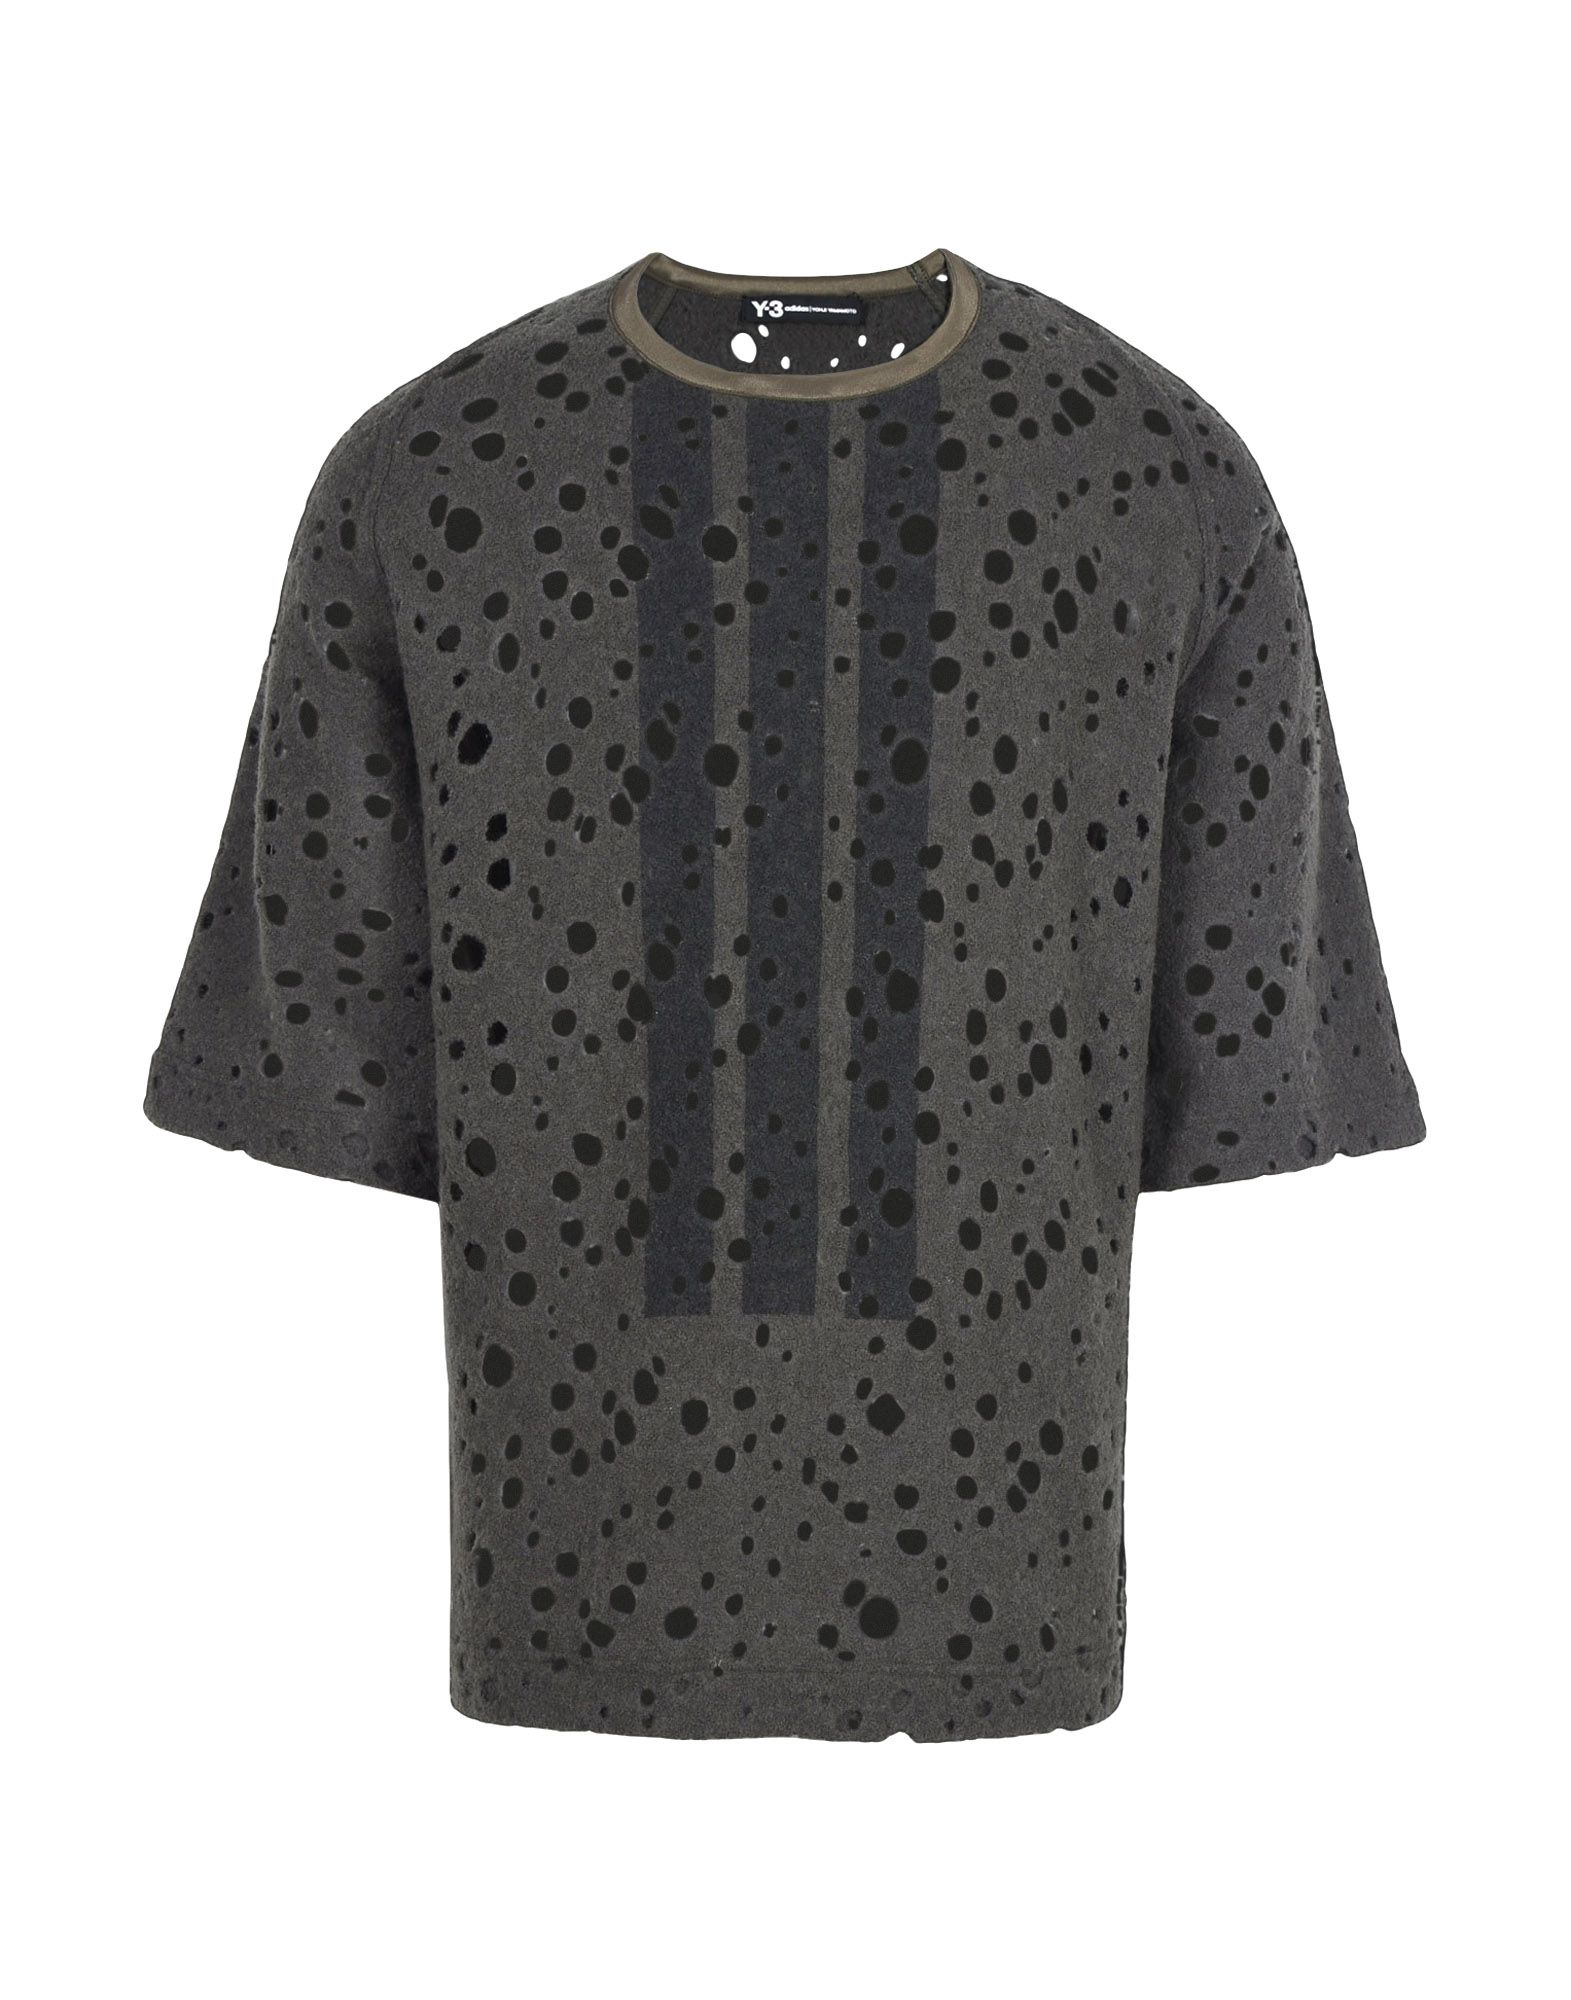 Y 3 WOOL JERSEY TEE for Men | Adidas Y-3 Official Store